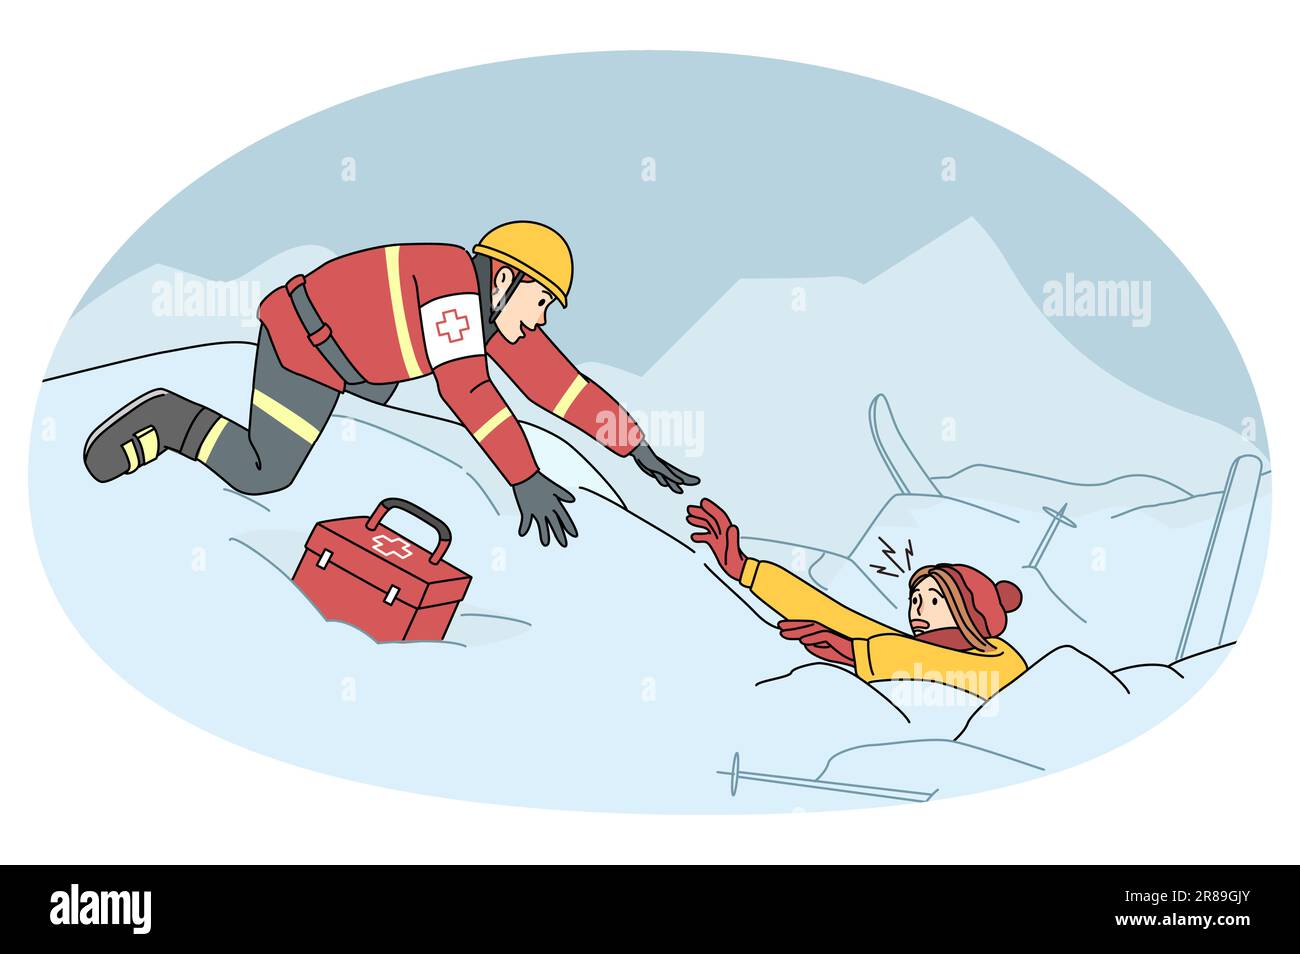 Lifesaver helping skier buried in avalanche after severe snowstorm. Rescuer find people in snow at ski resort. Lifesaving and rescuing operation. Flat vector illustration. Stock Vector